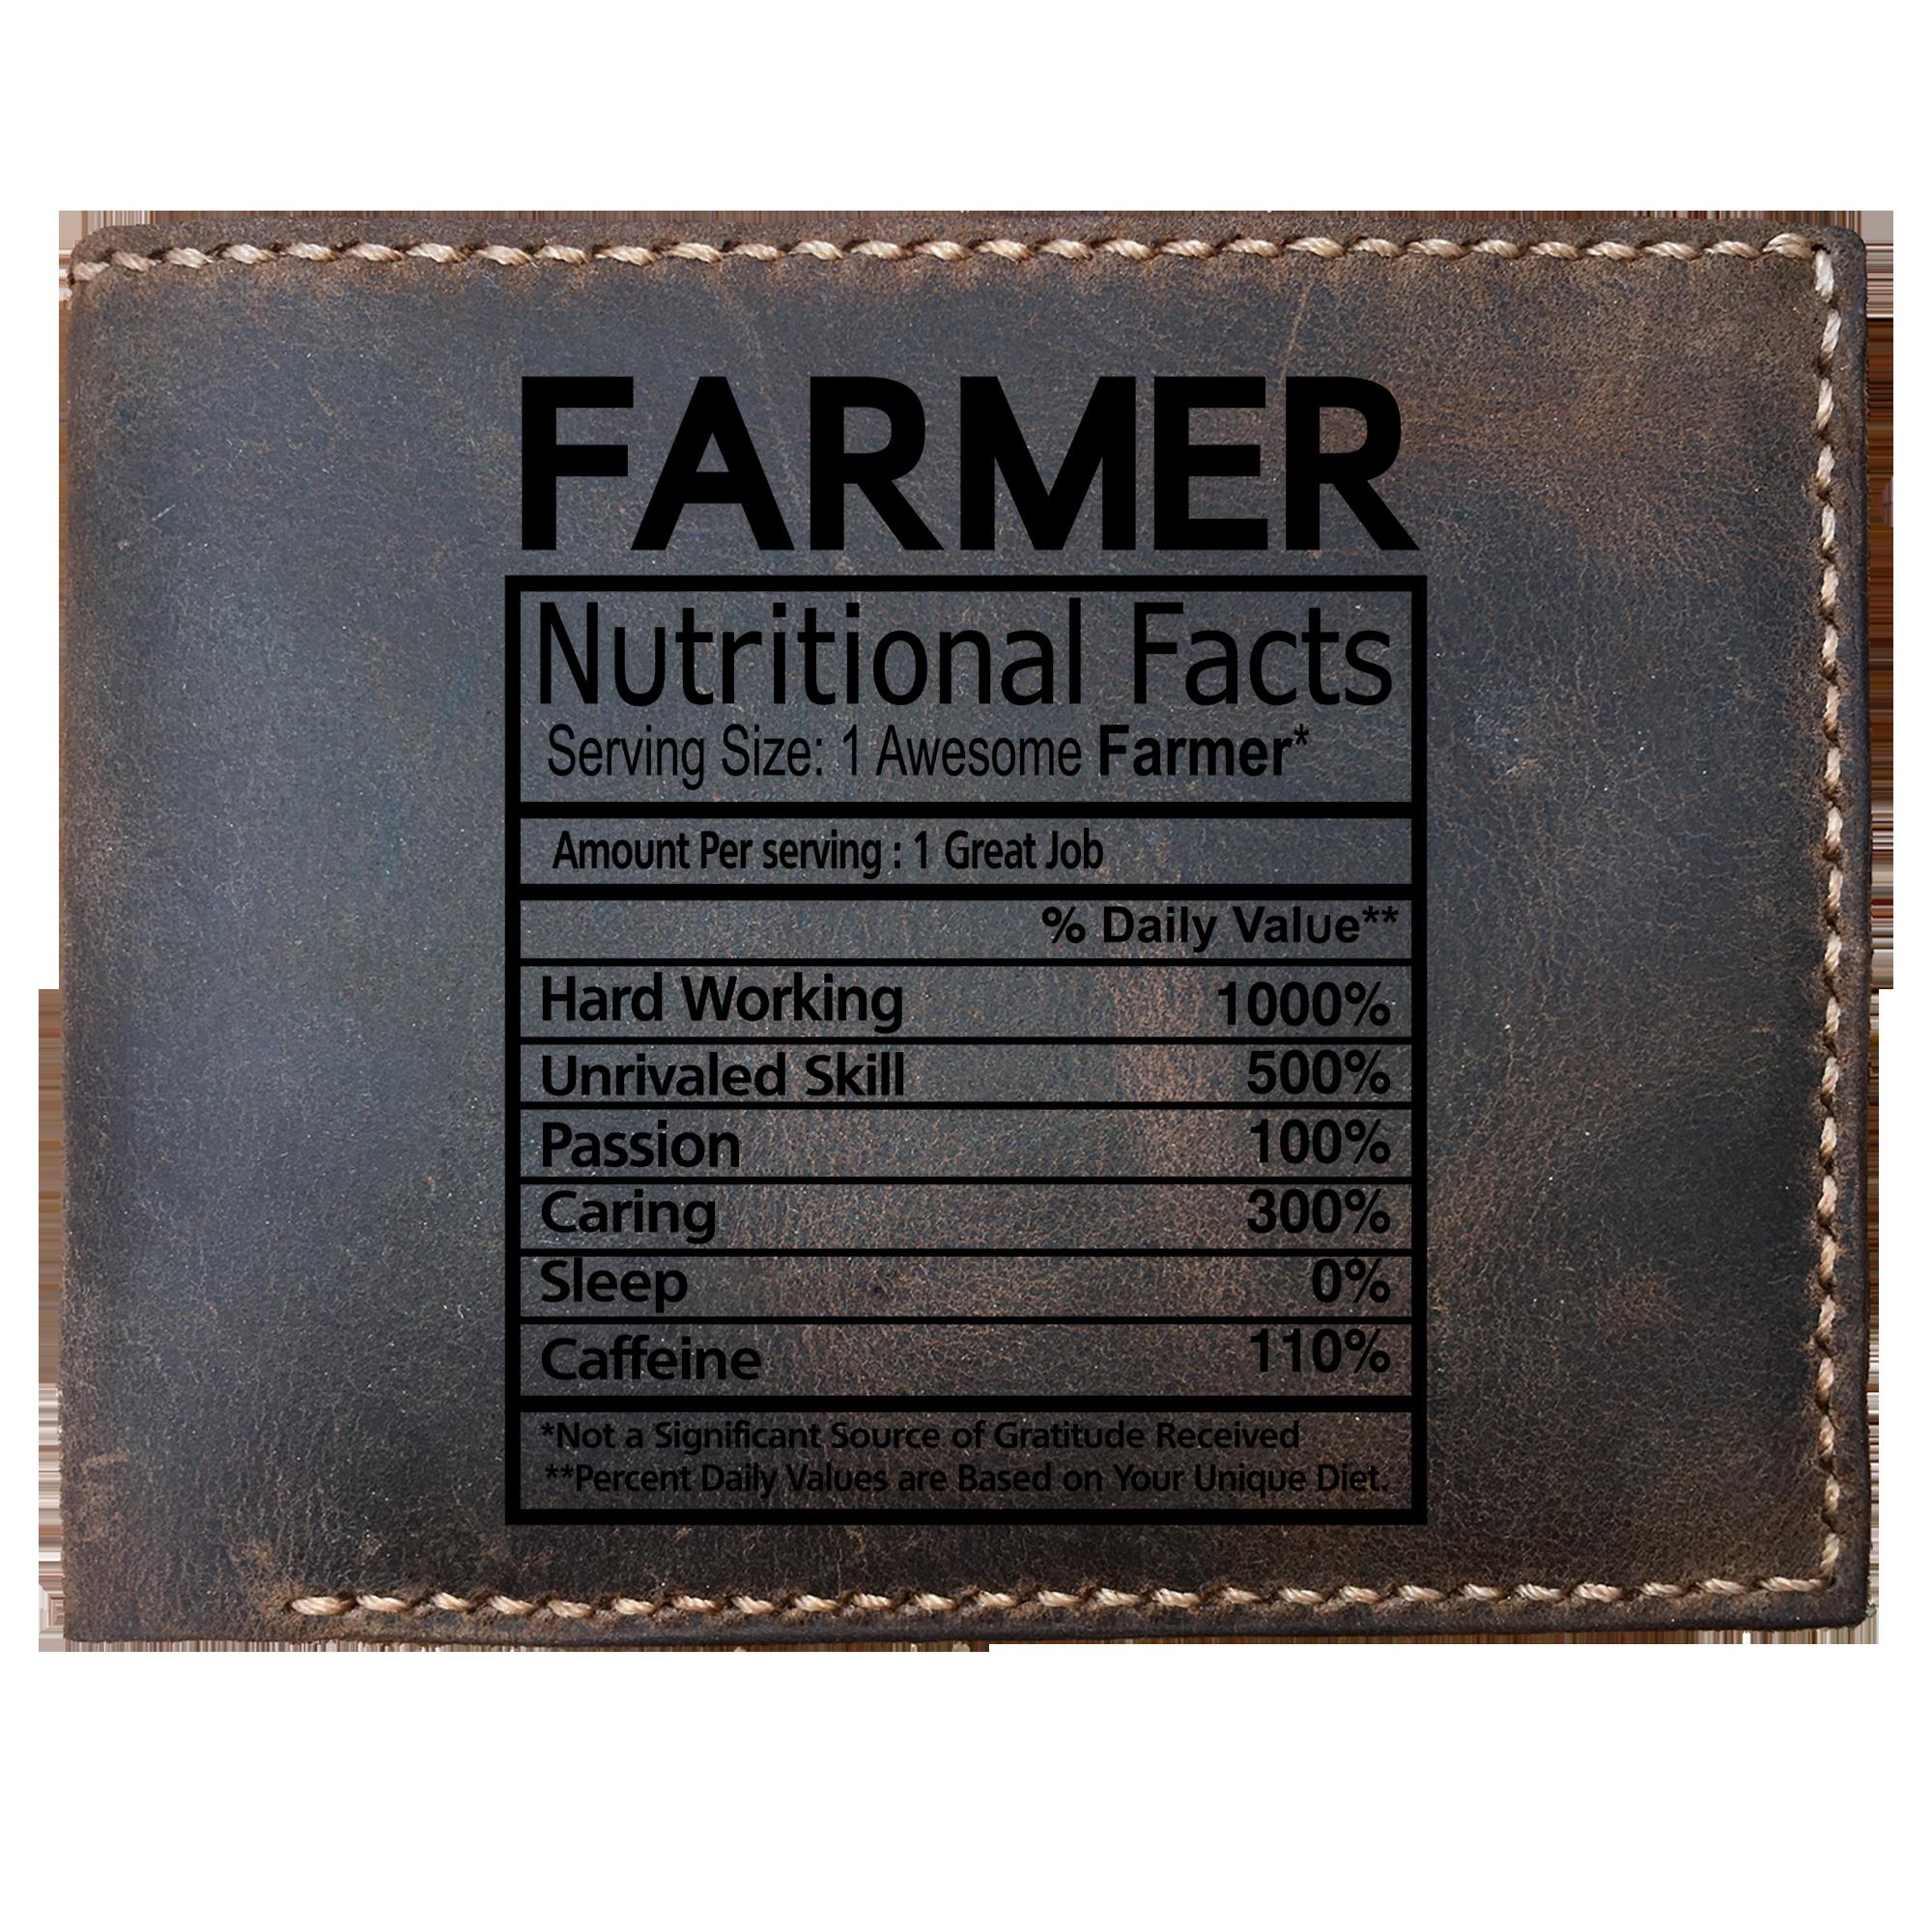 Skitongifts Funny Custom Laser Engraved Bifold Leather Wallet For Men, Farmer Nutritional Facts